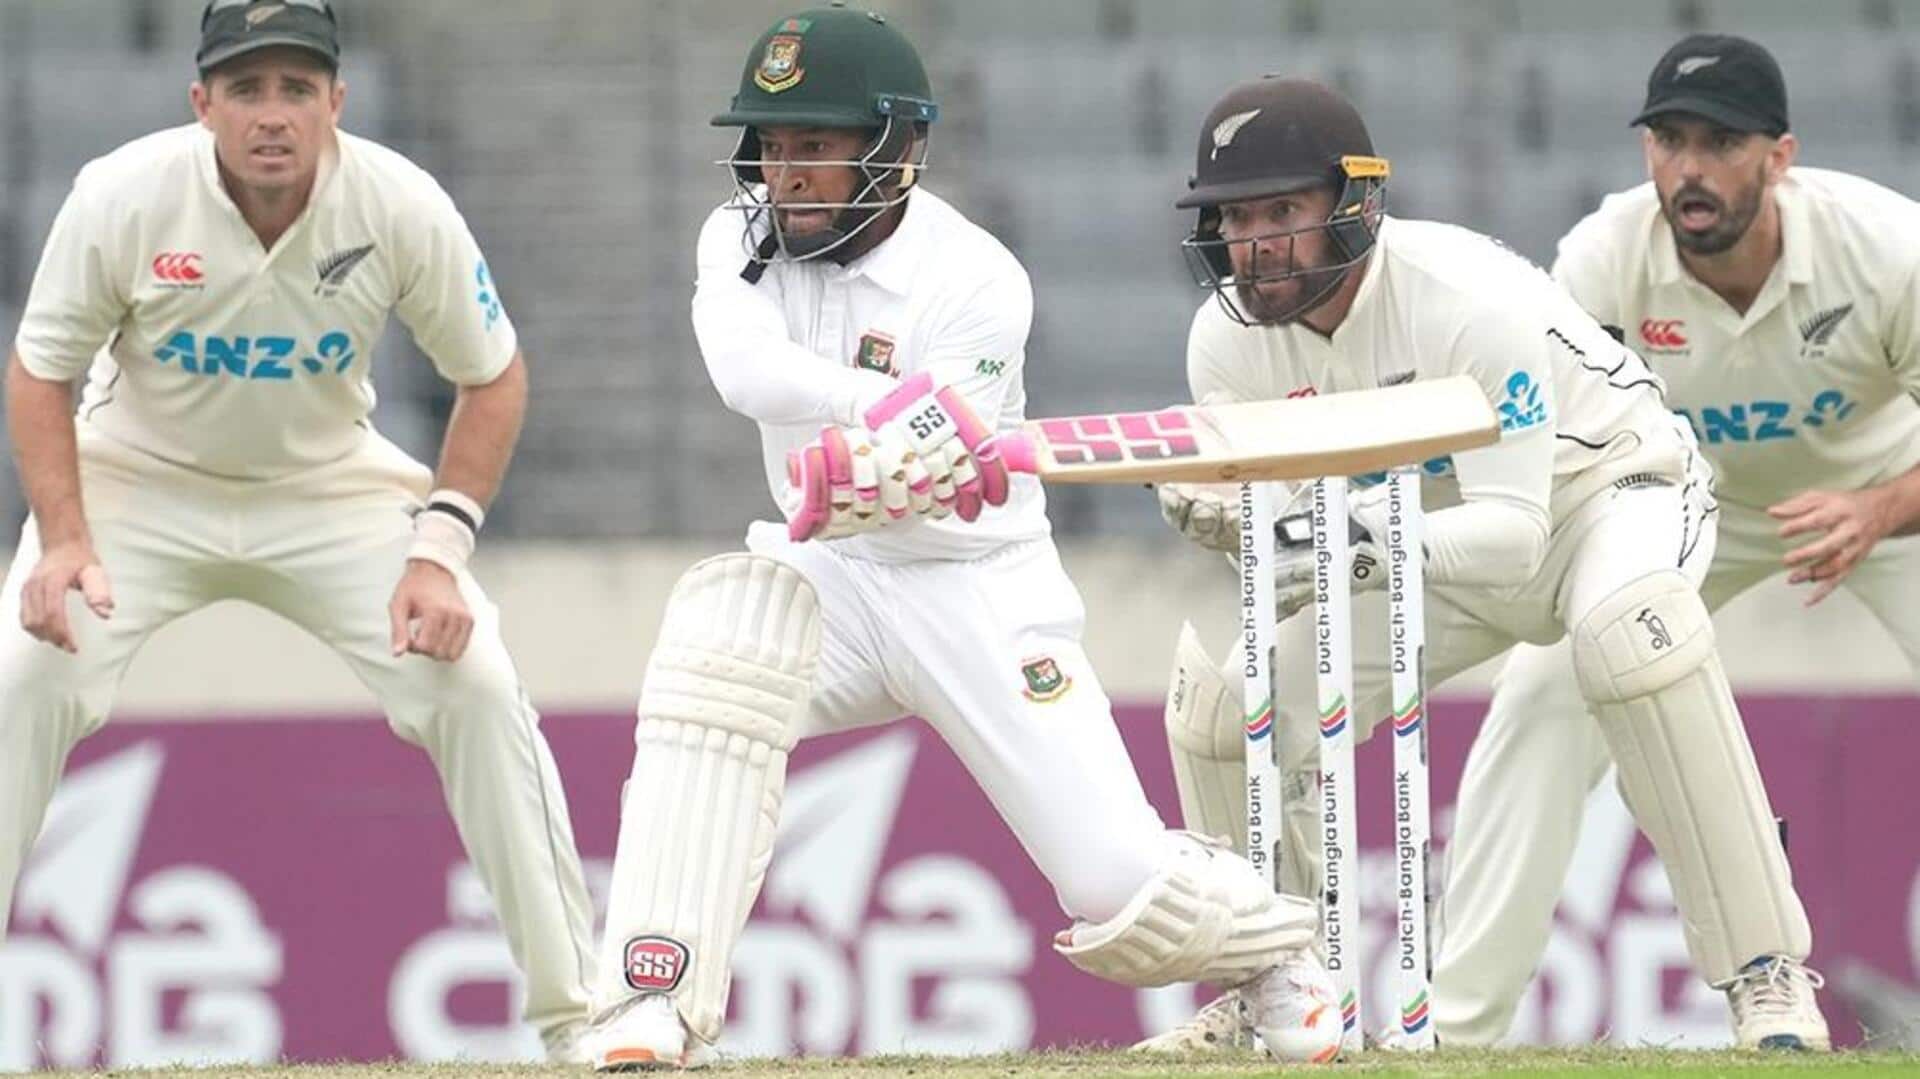 Here's why Mushfiqur Rahim got out for obstructing the field